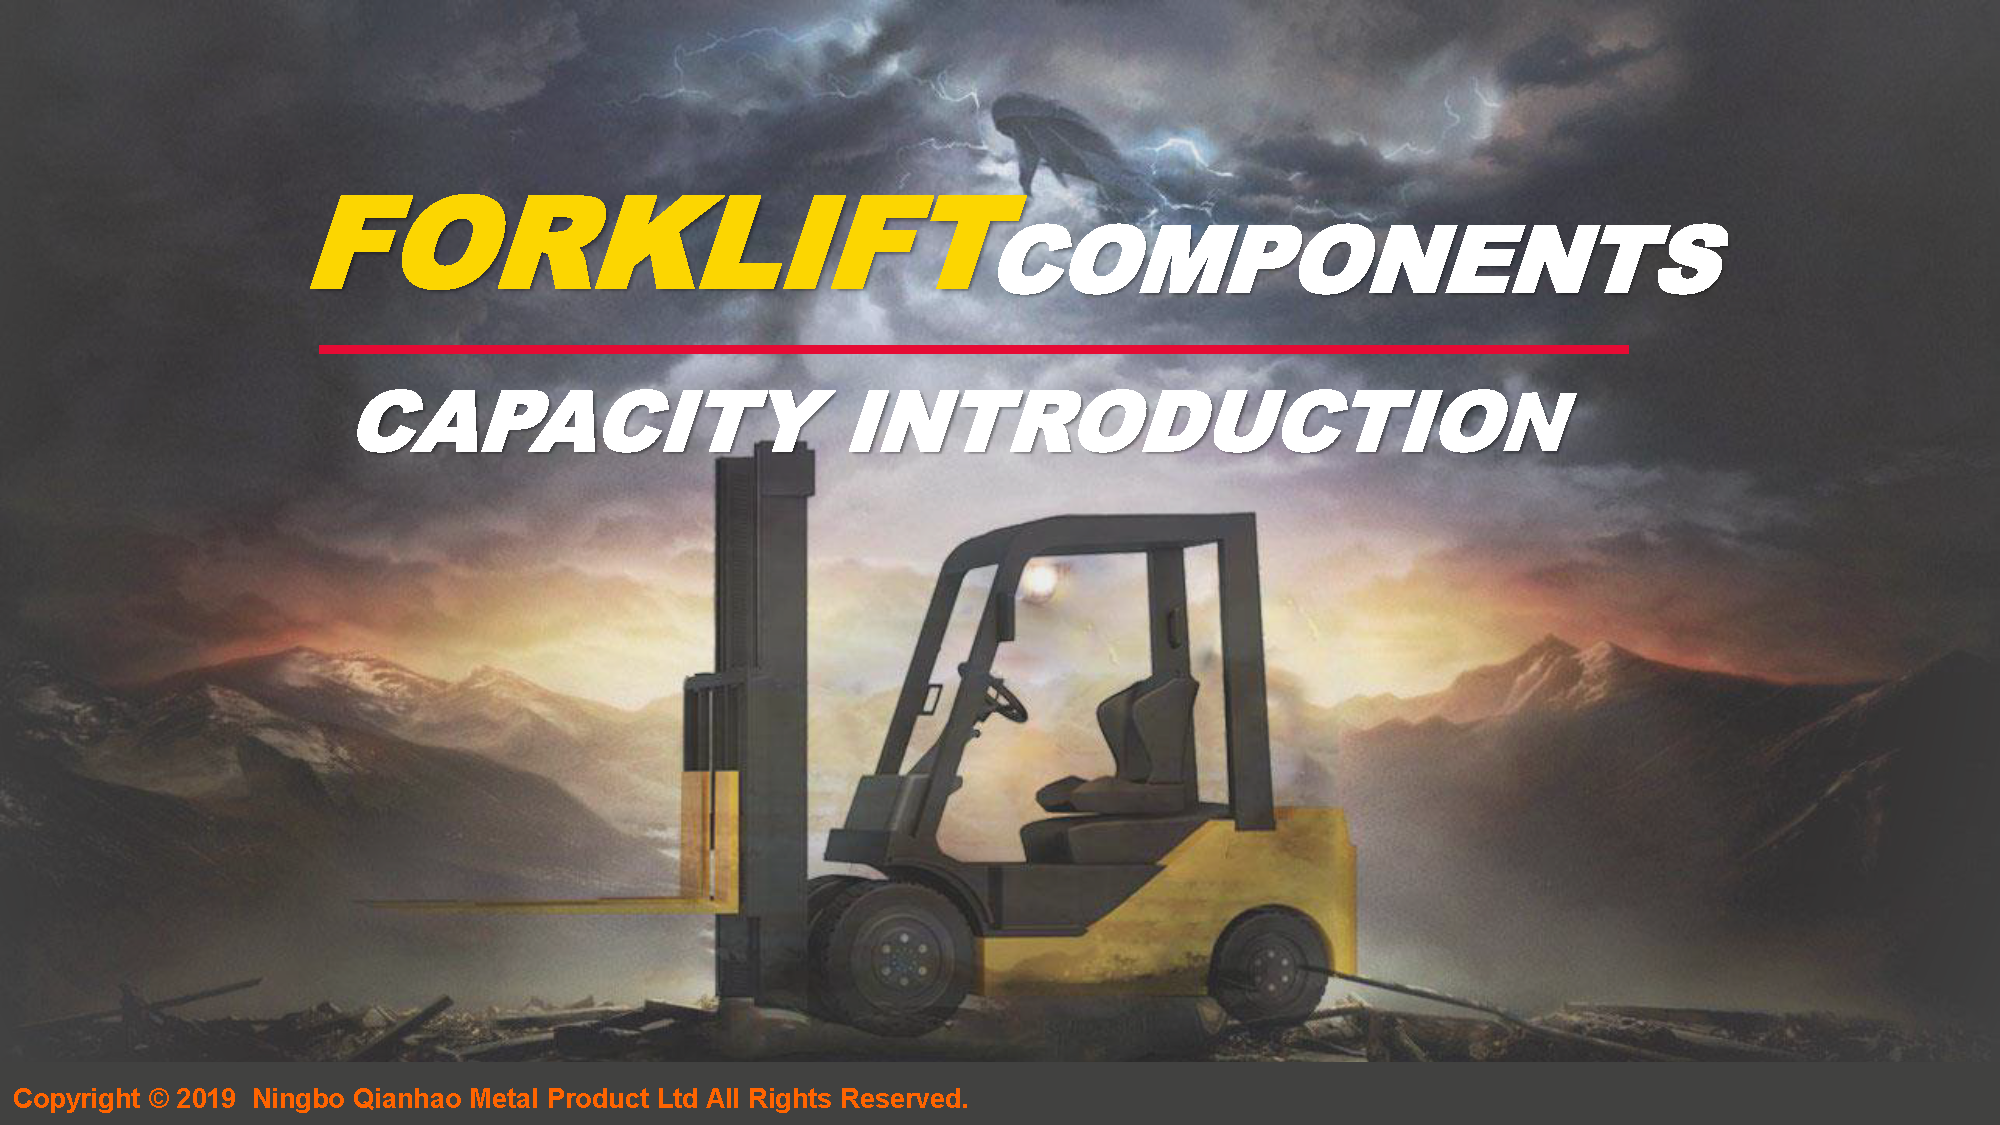 2.Forklift Components Capacity Introduction 19.4.9(图1)